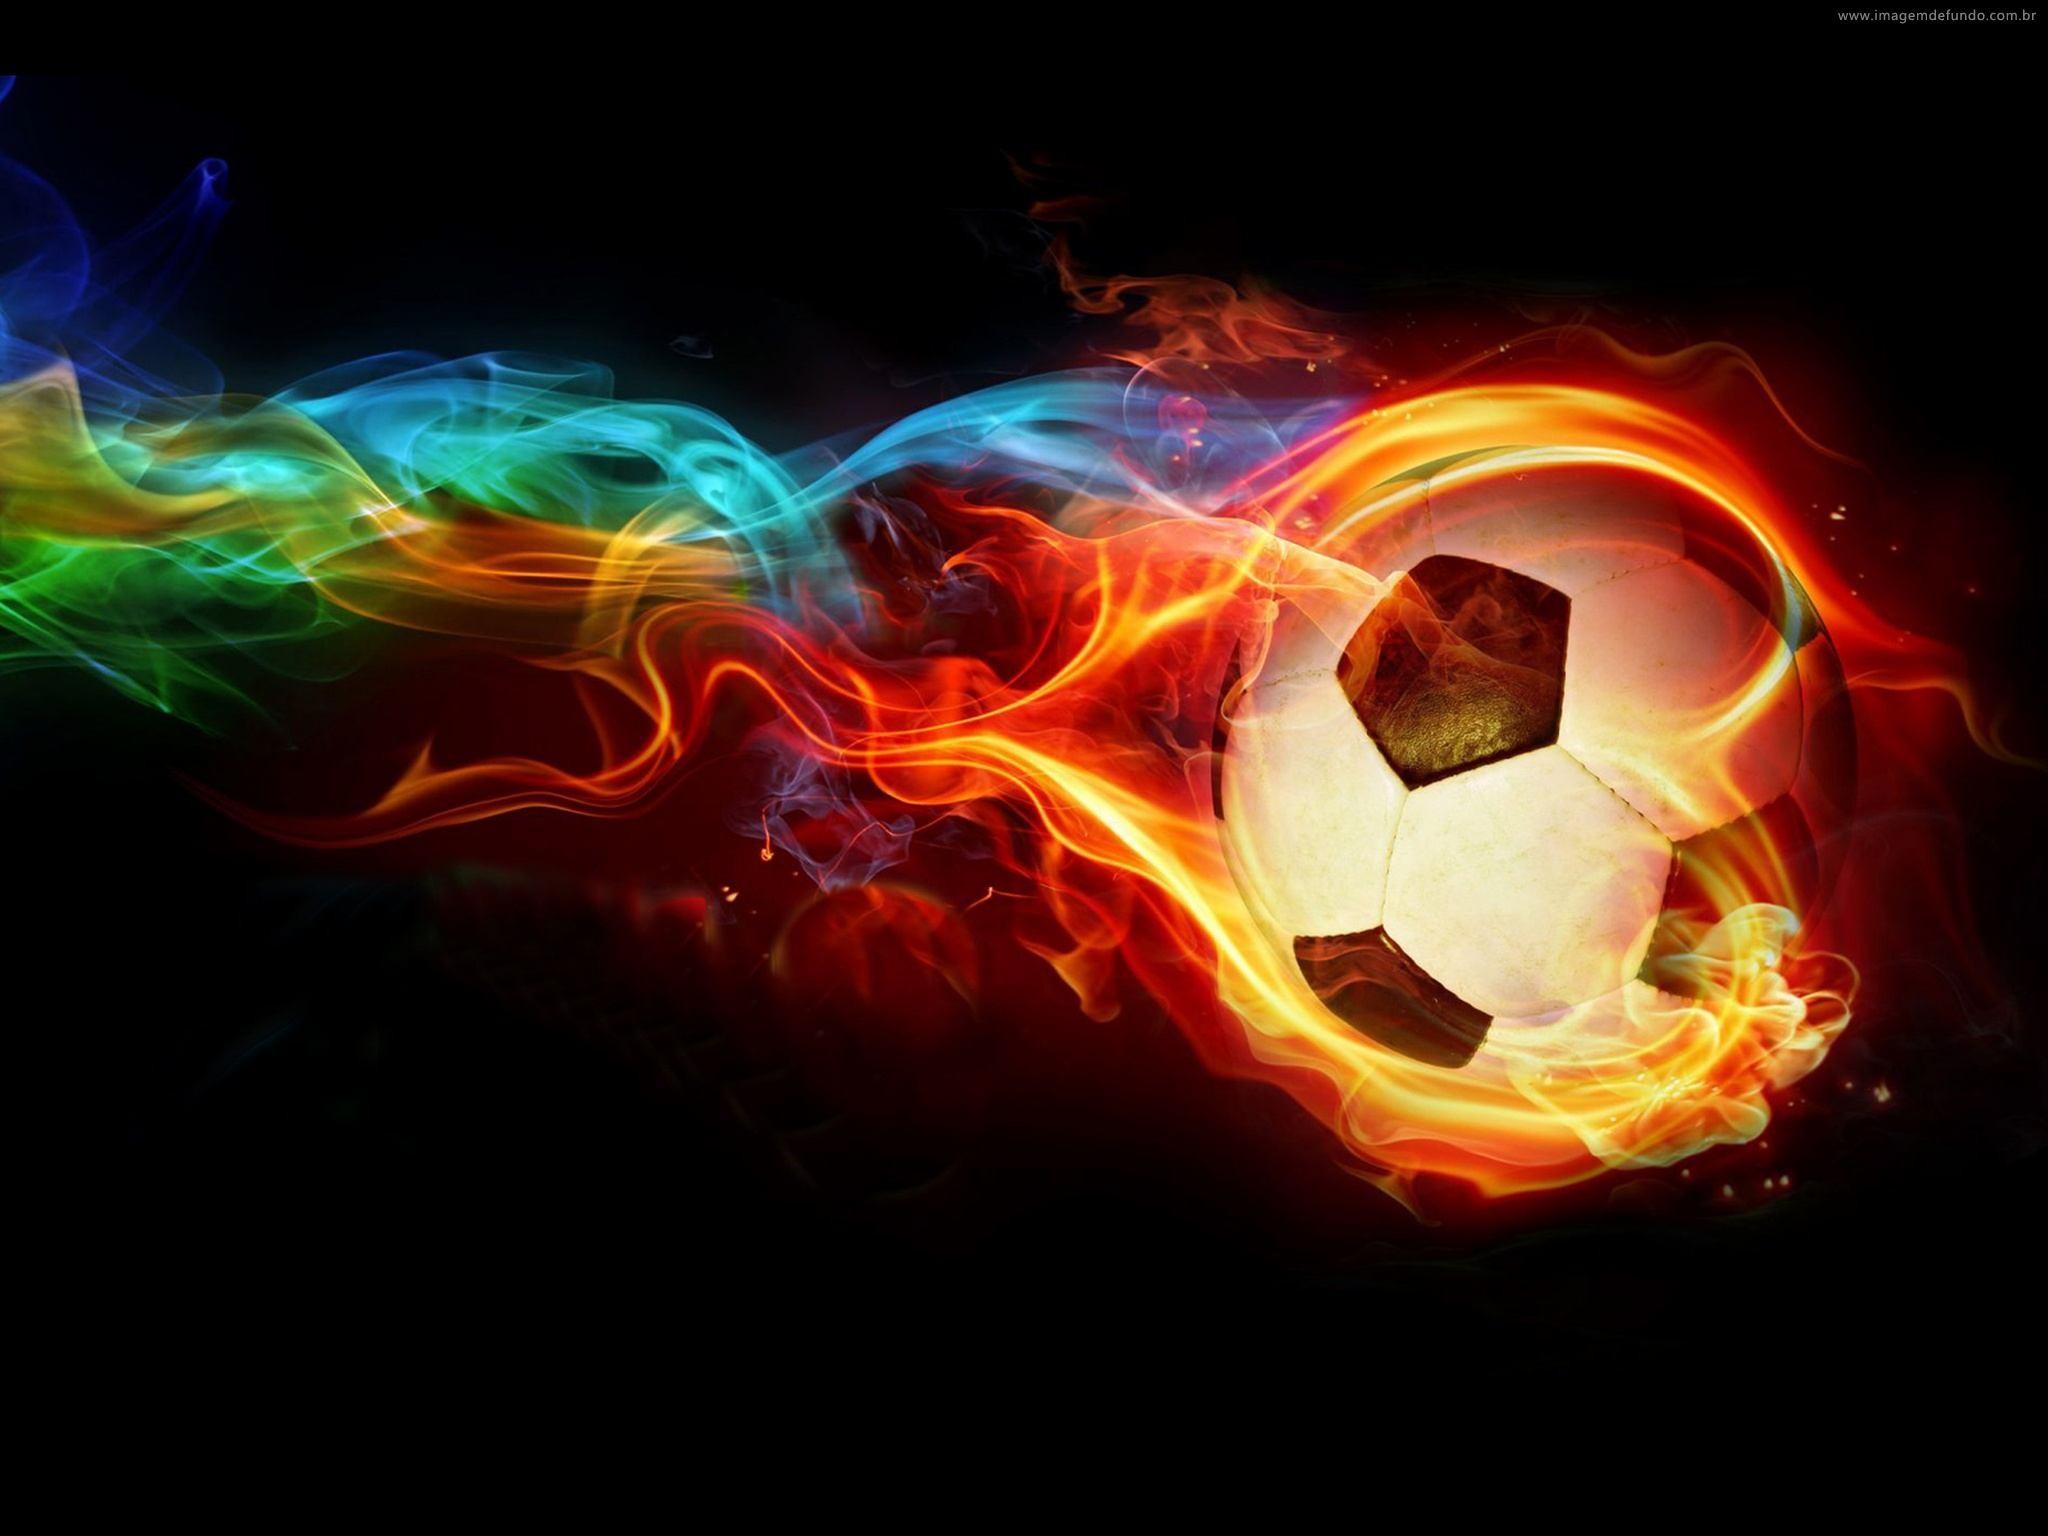 Galaxy Soccer Wallpapers